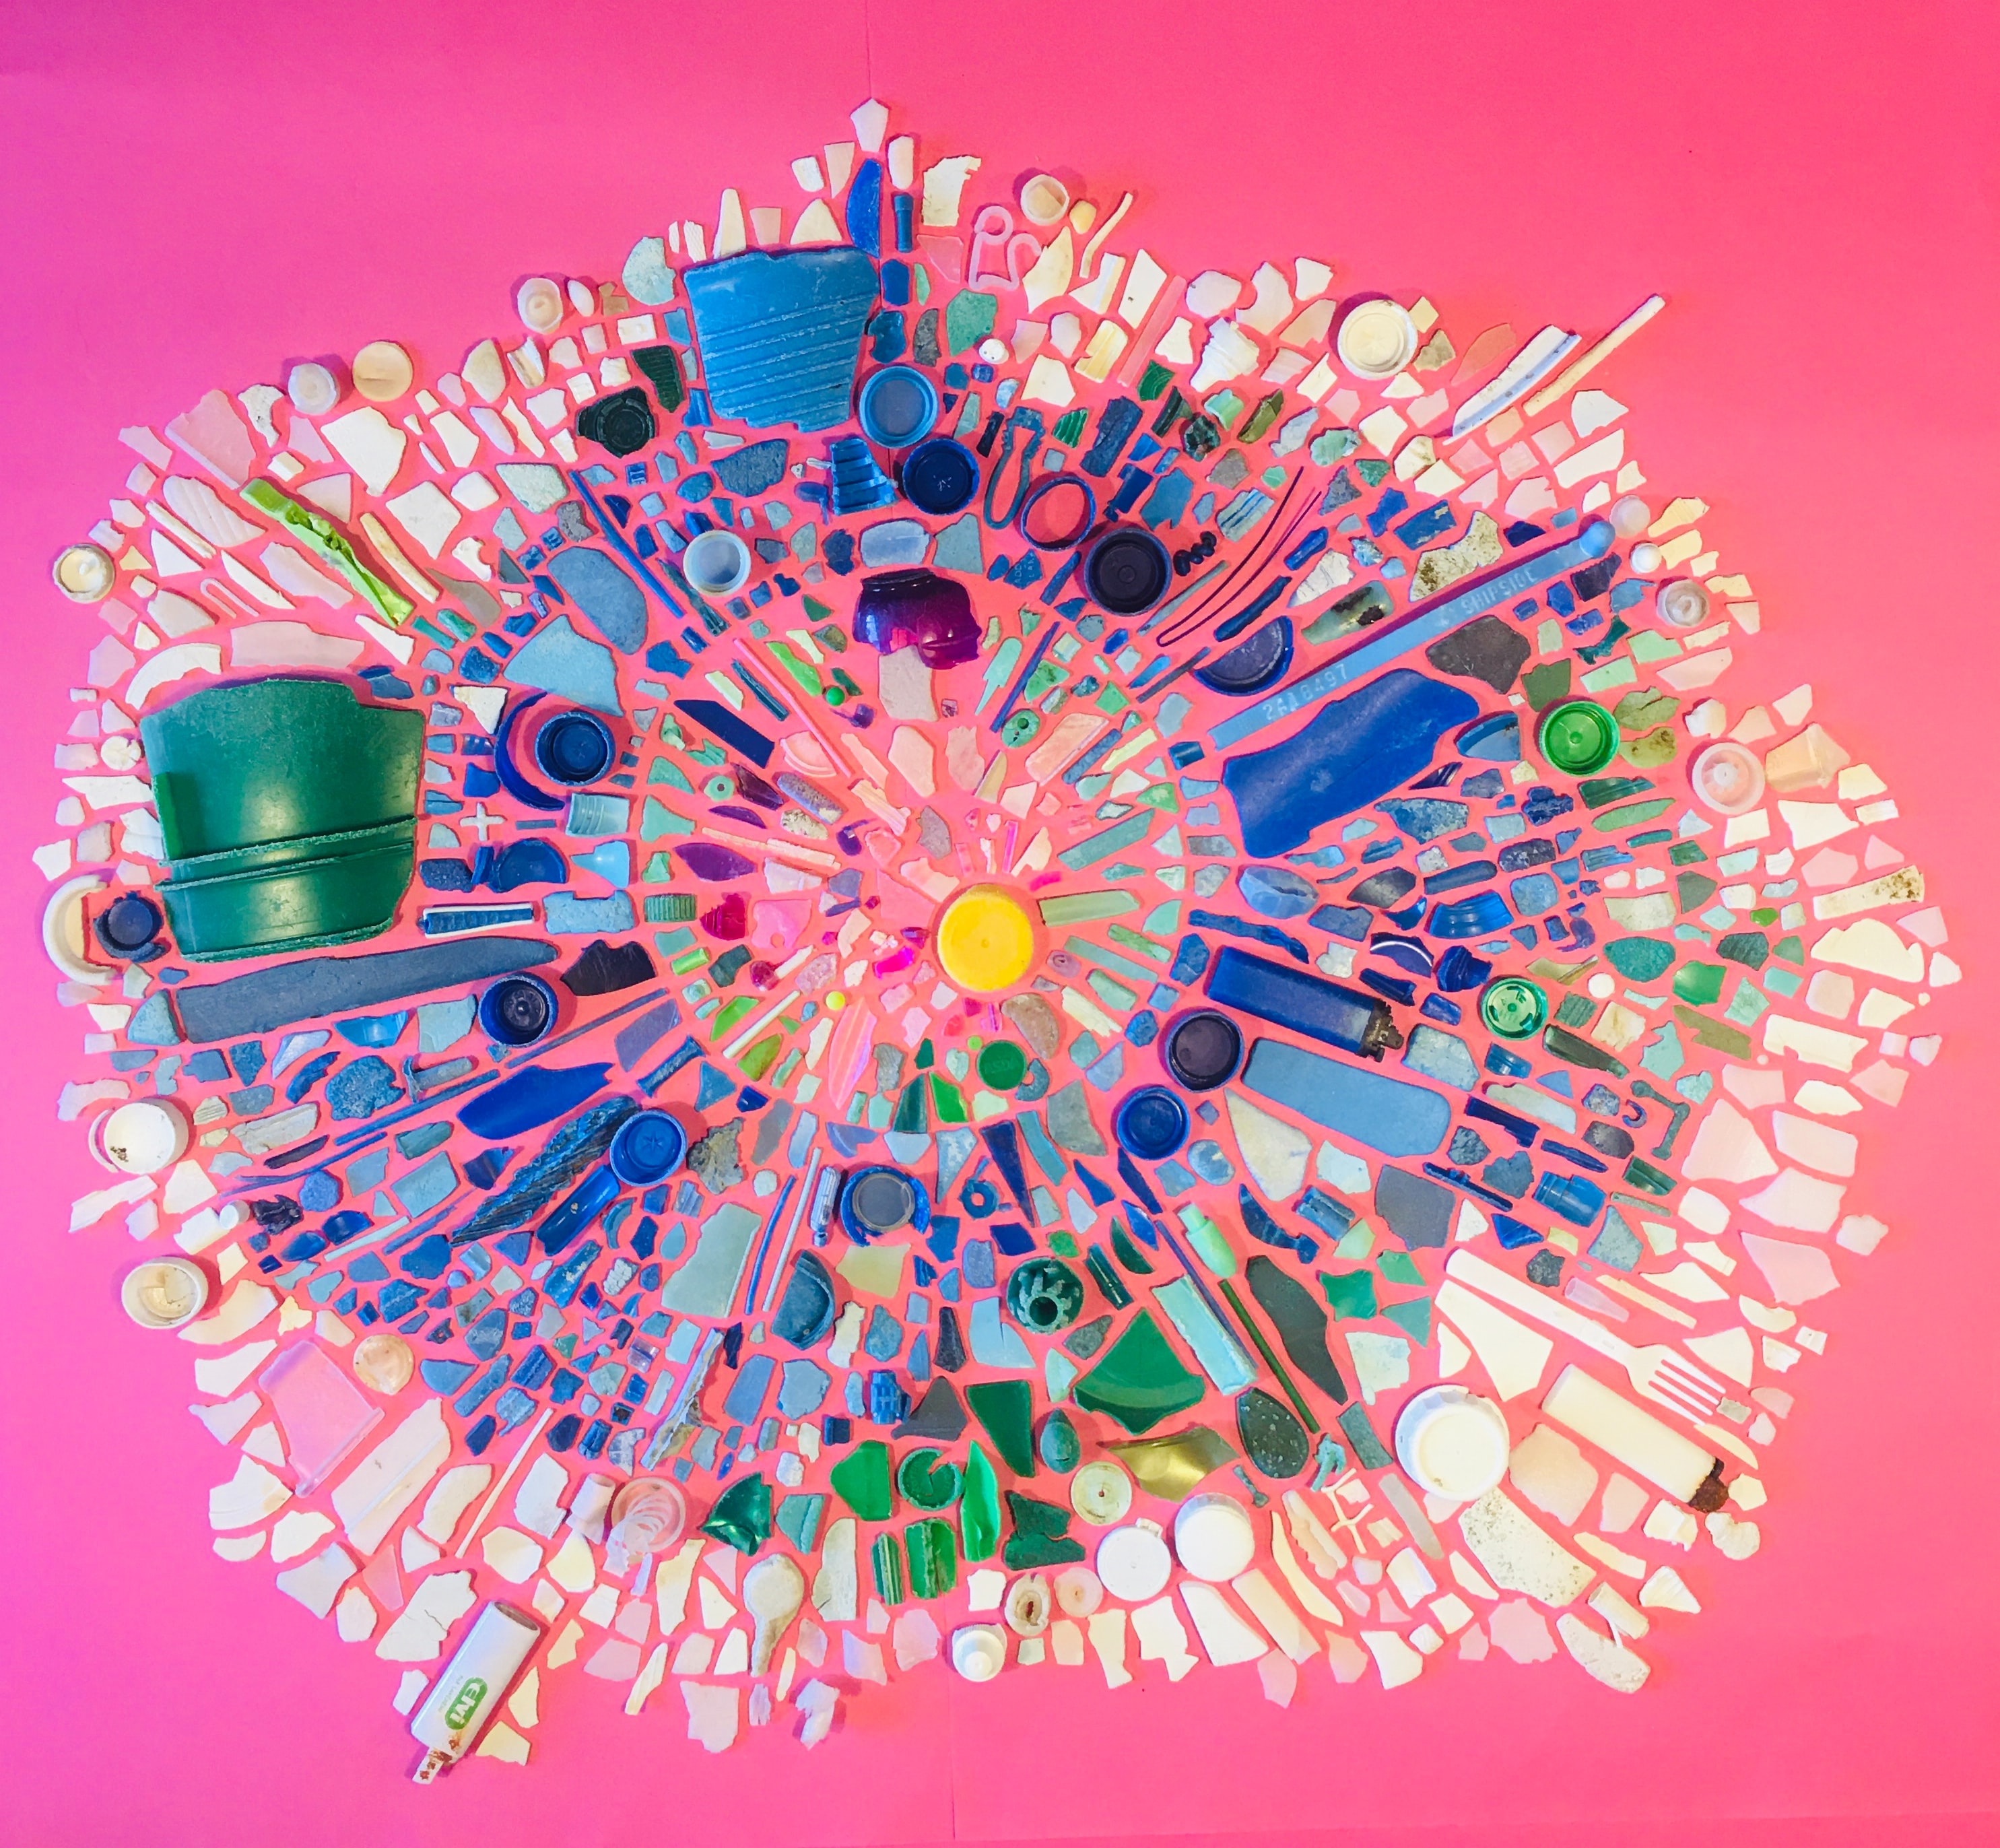 An assemblage of plastic on a pink background creates an artful mosaic. 